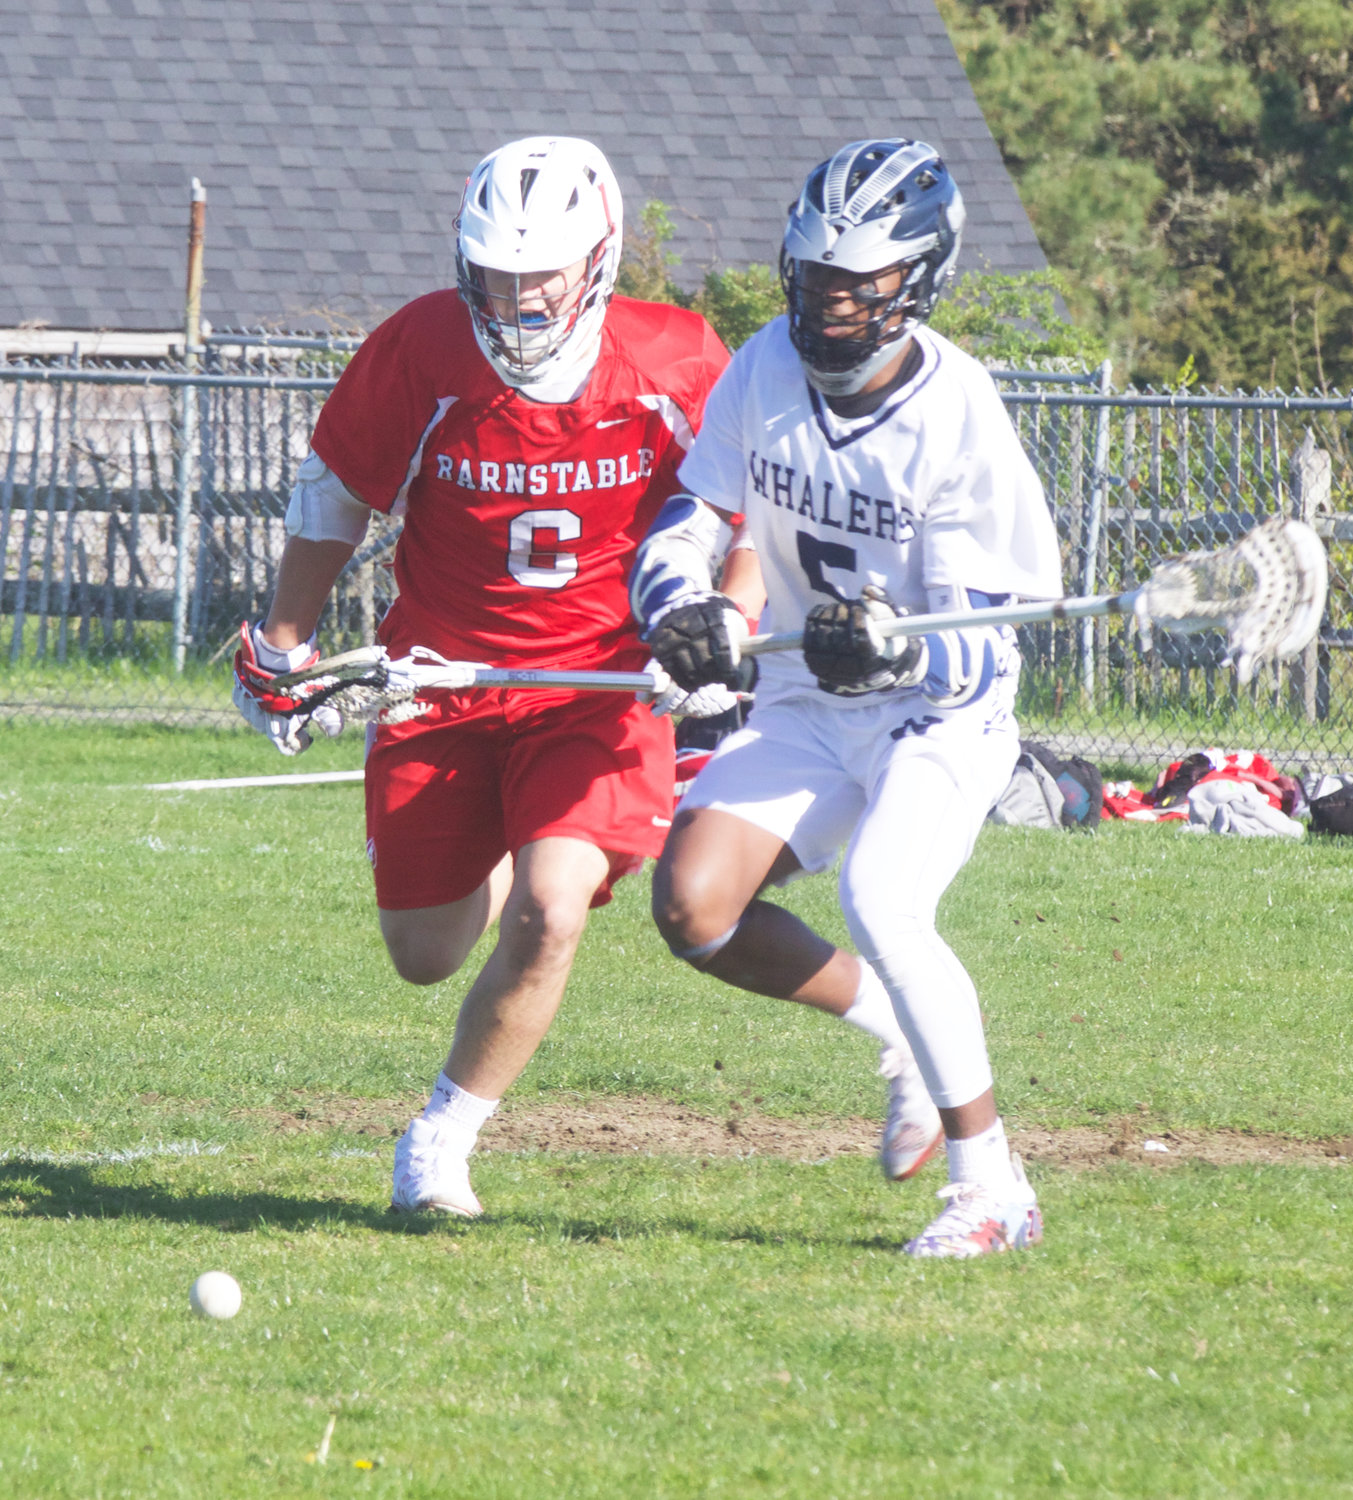 Makai Bodden chases after a loose ball in Nantucket’s season-opening loss to Barnstable Monday.